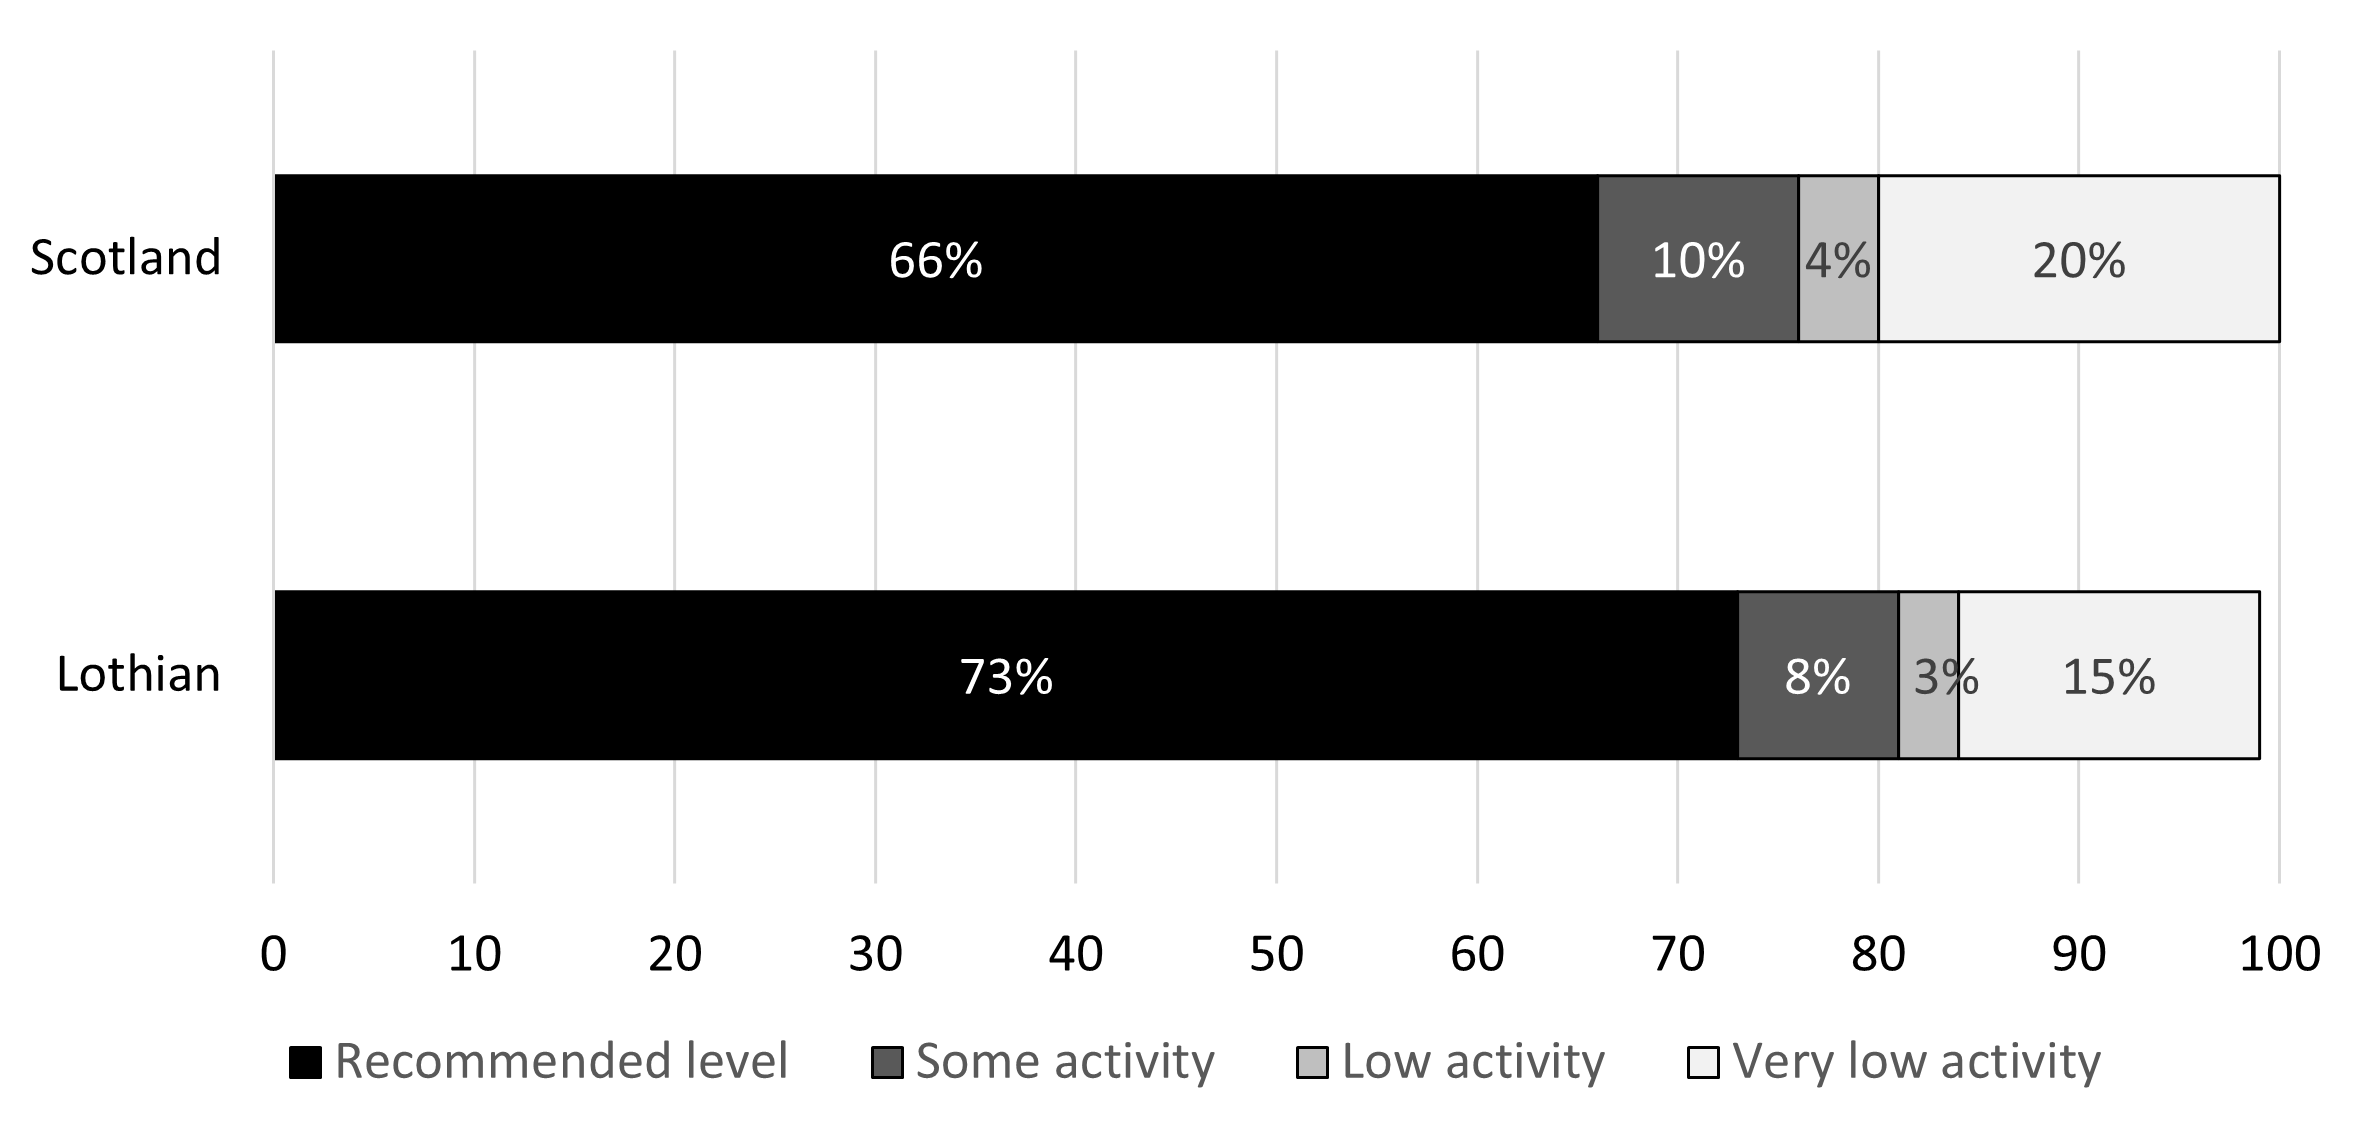 The majority of adults in both Lothian and Scotland achieved the recommended level of physical activity in 2020, with 73% of adults in Lothian and 66% in Scotland meeting recommendations. However, there were still 15% of adults in Lothian and 20% in Scotland with a very low level of physical activity.